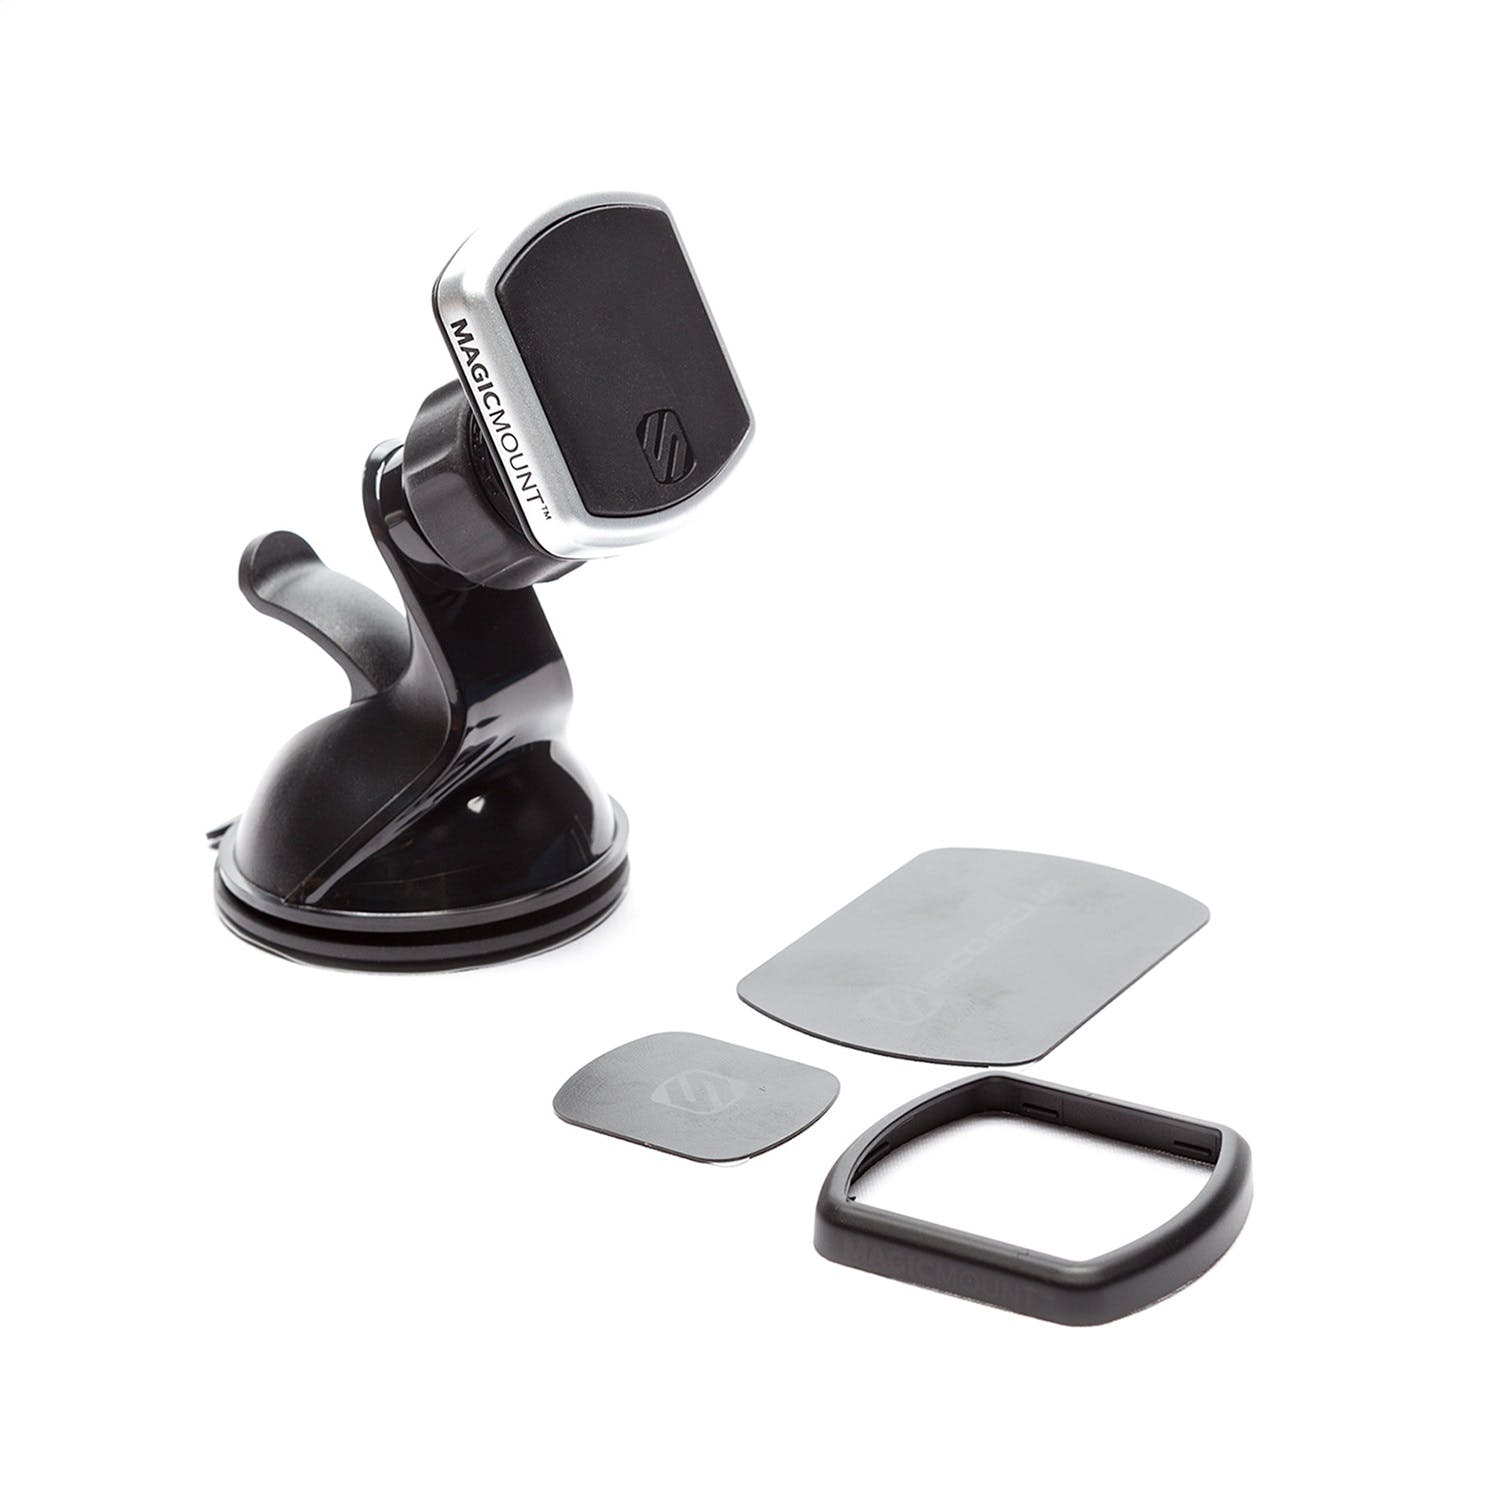 AutoMeter Products 5327 Mobile Device Mount, Scosche Magicmount Pro Dash/Window For Dashlink